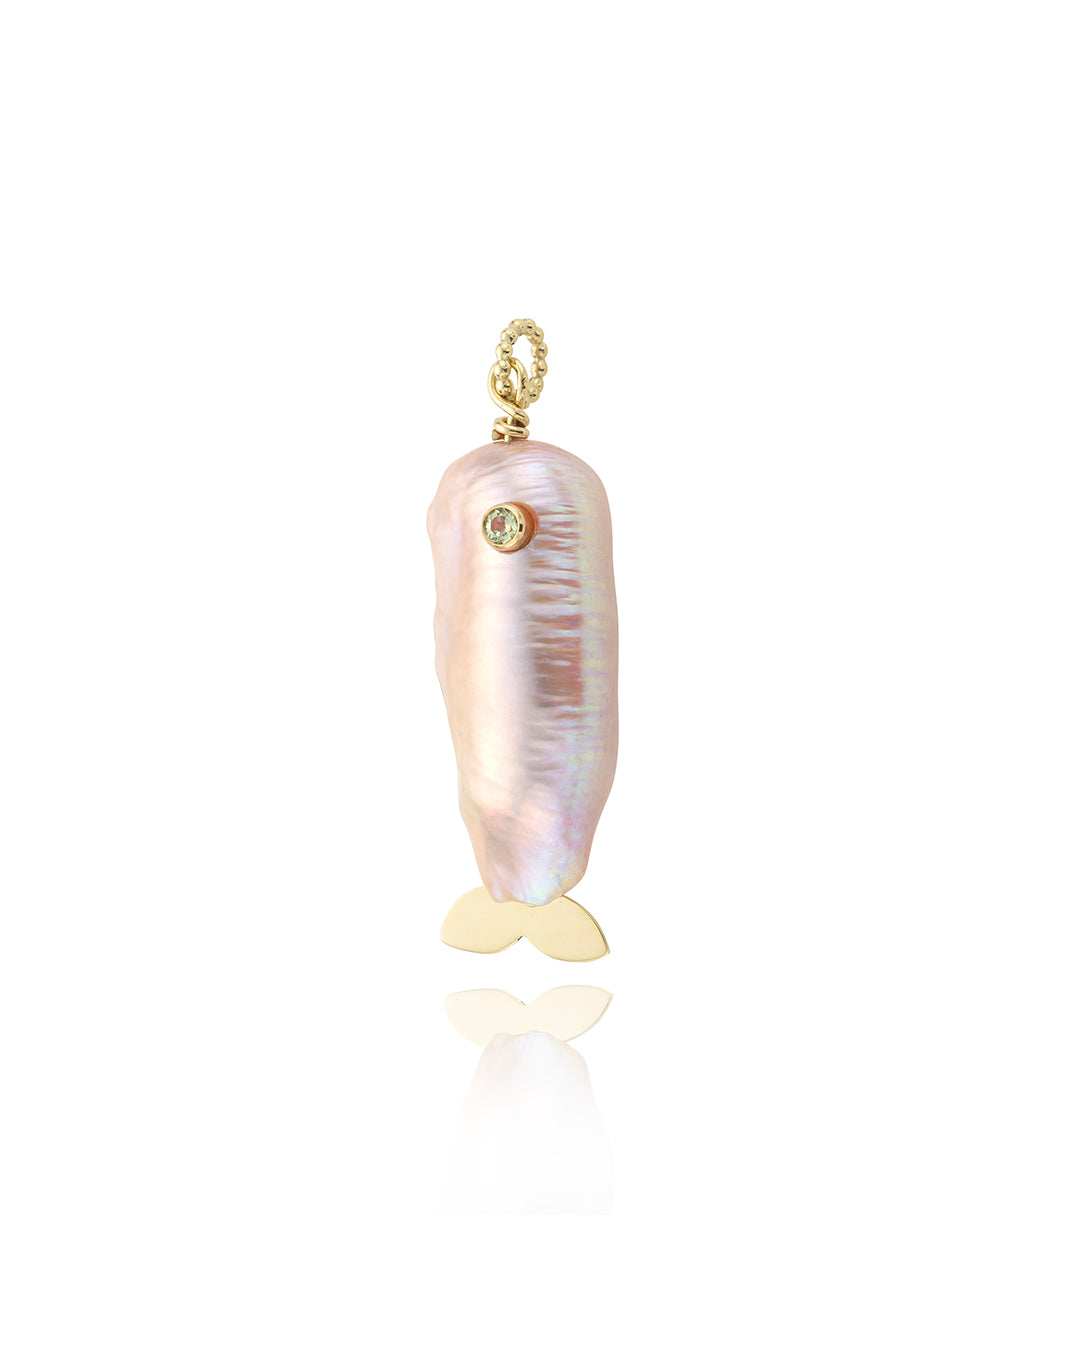 FISH OF PEARL WHITE- Solid gold